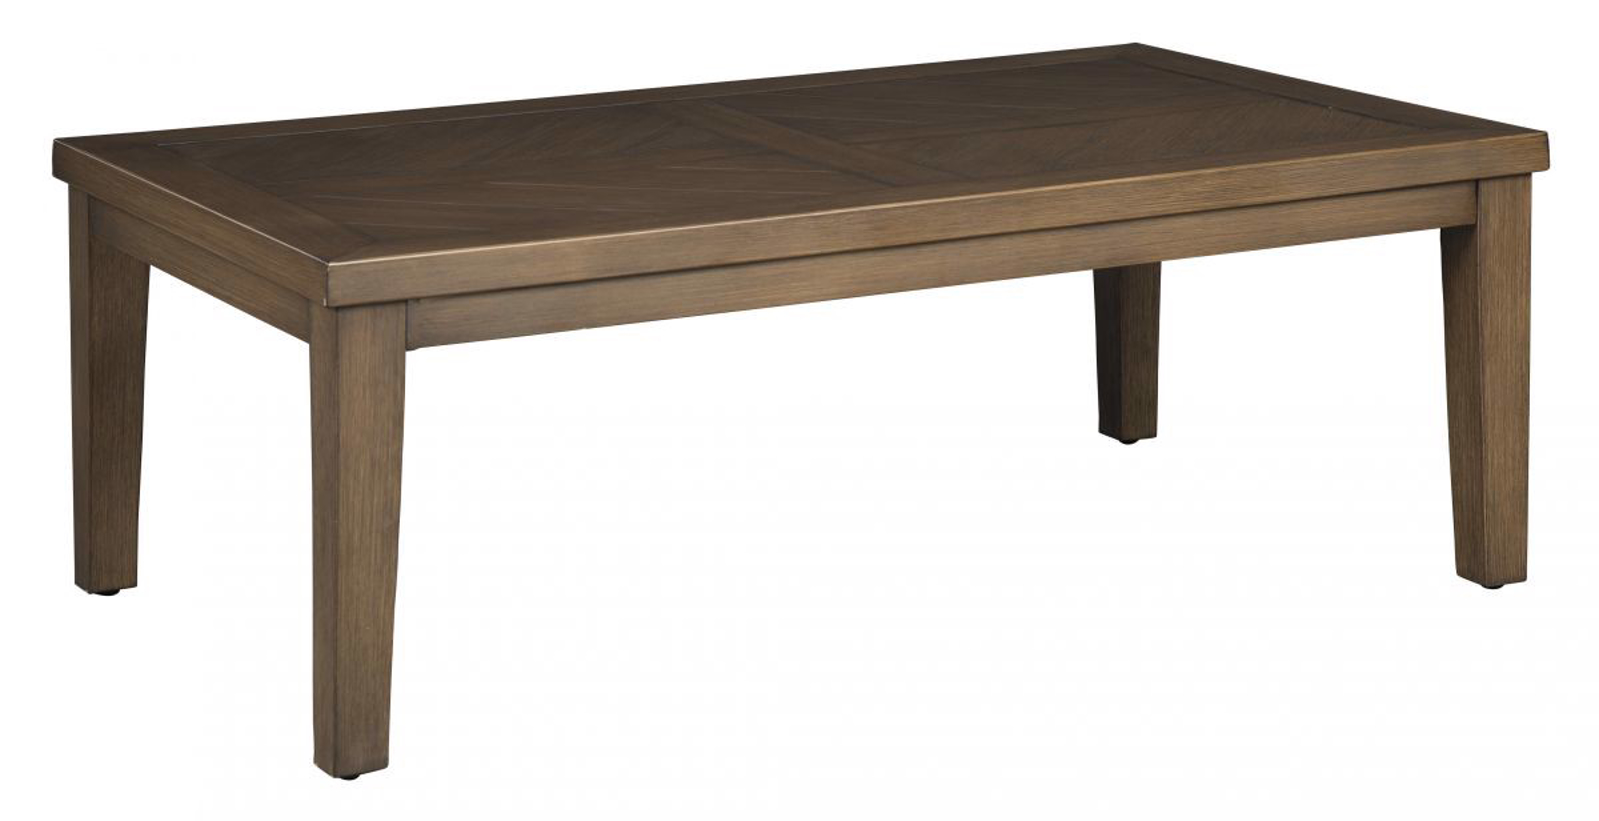 Picture of Paradise Trail Patio Coffee Table